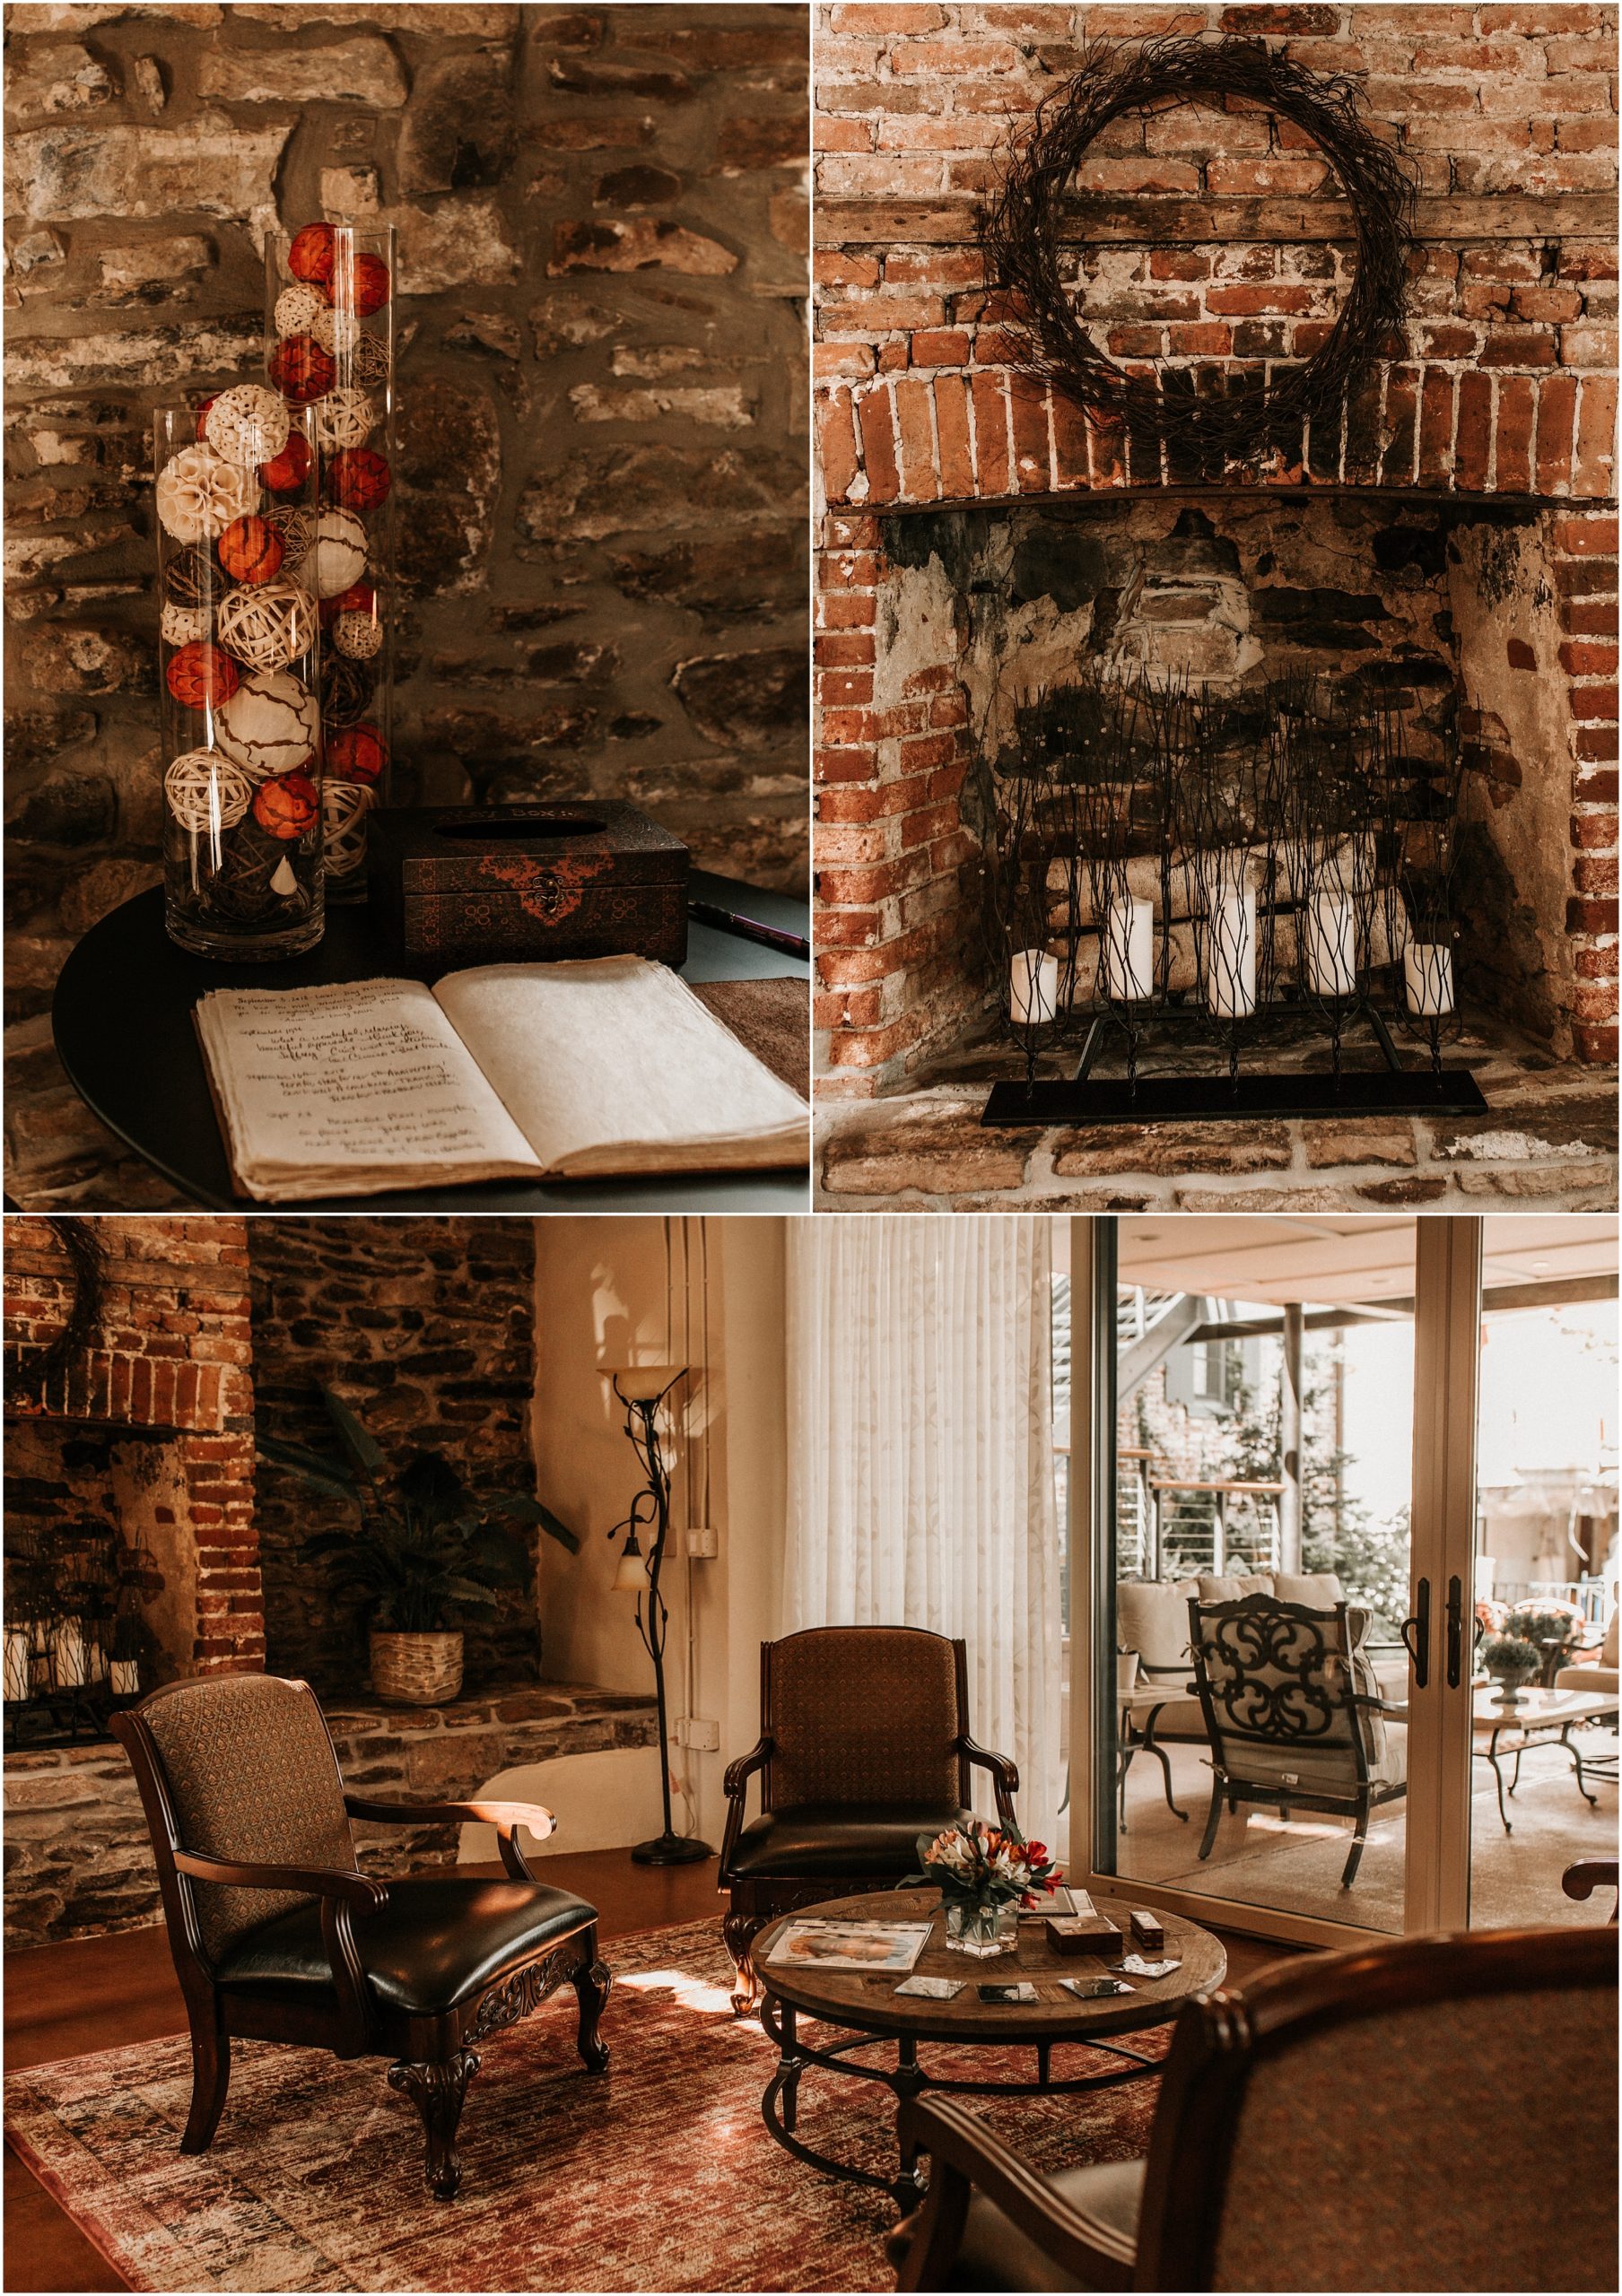 In-Home Couples Session at The Carriage House of New Hope, PA